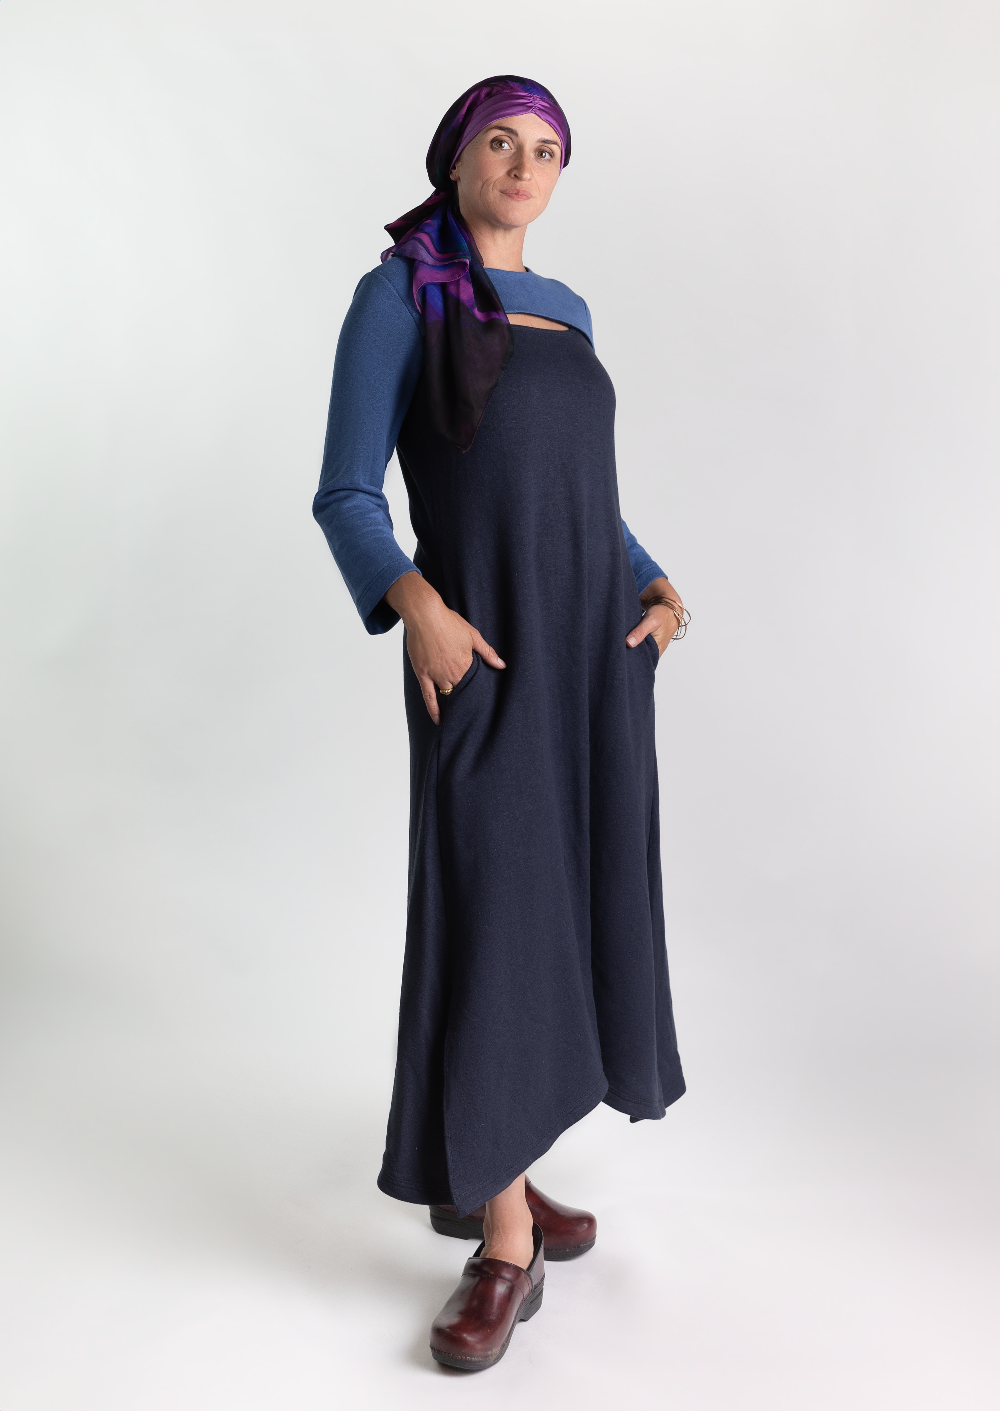 Woman in a cozy stylish dress that is chest port accessible for infusions. Wearing a silk headscarf